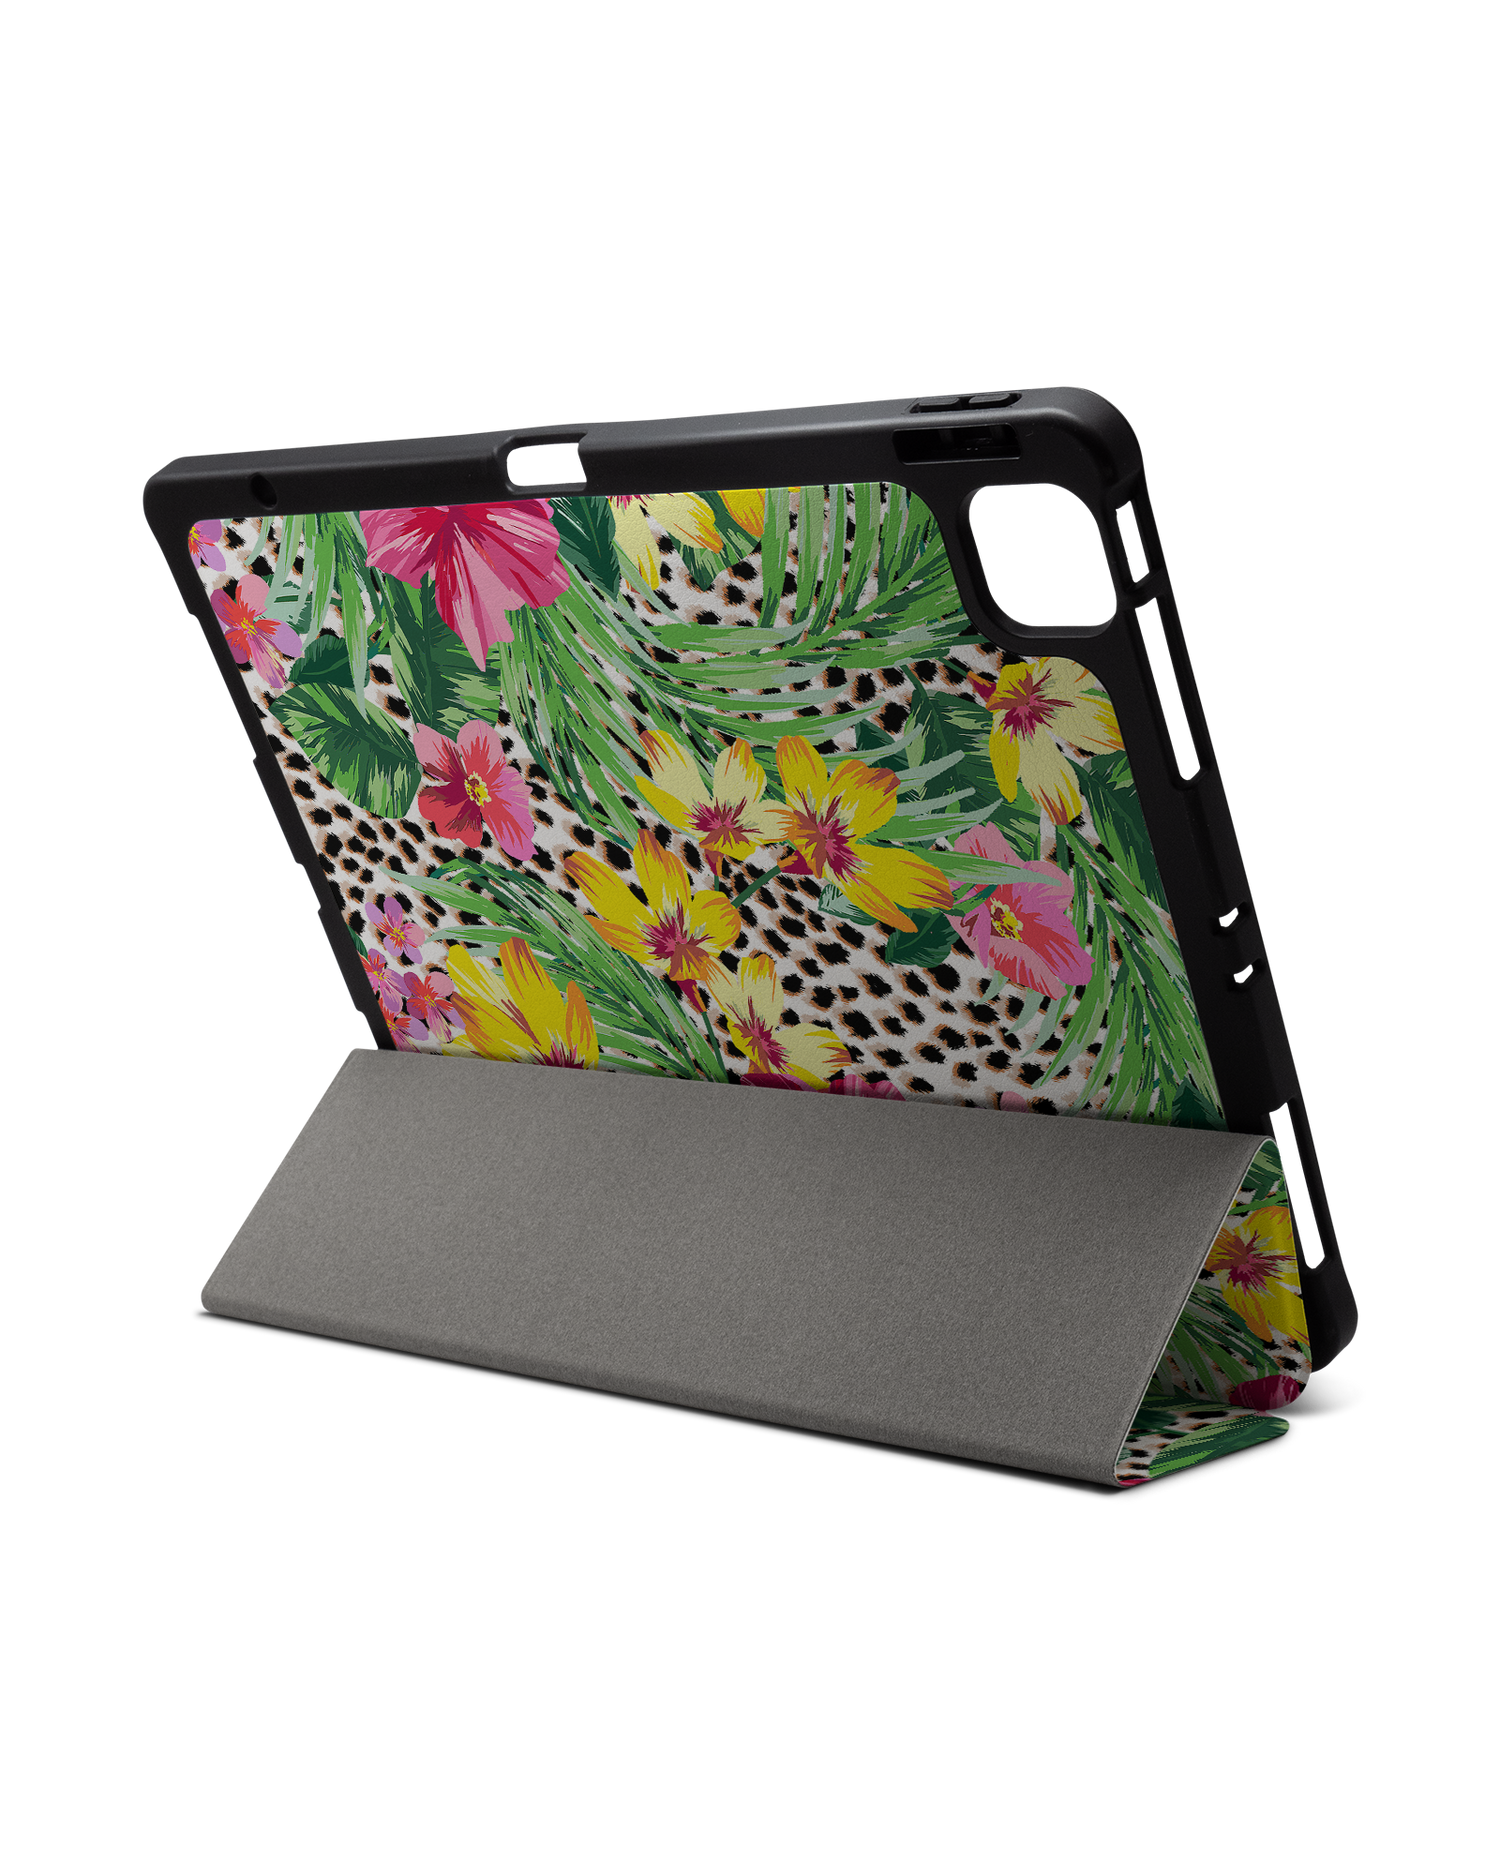 Tropical Cheetah iPad Case with Pencil Holder for Apple iPad Pro 6 12.9